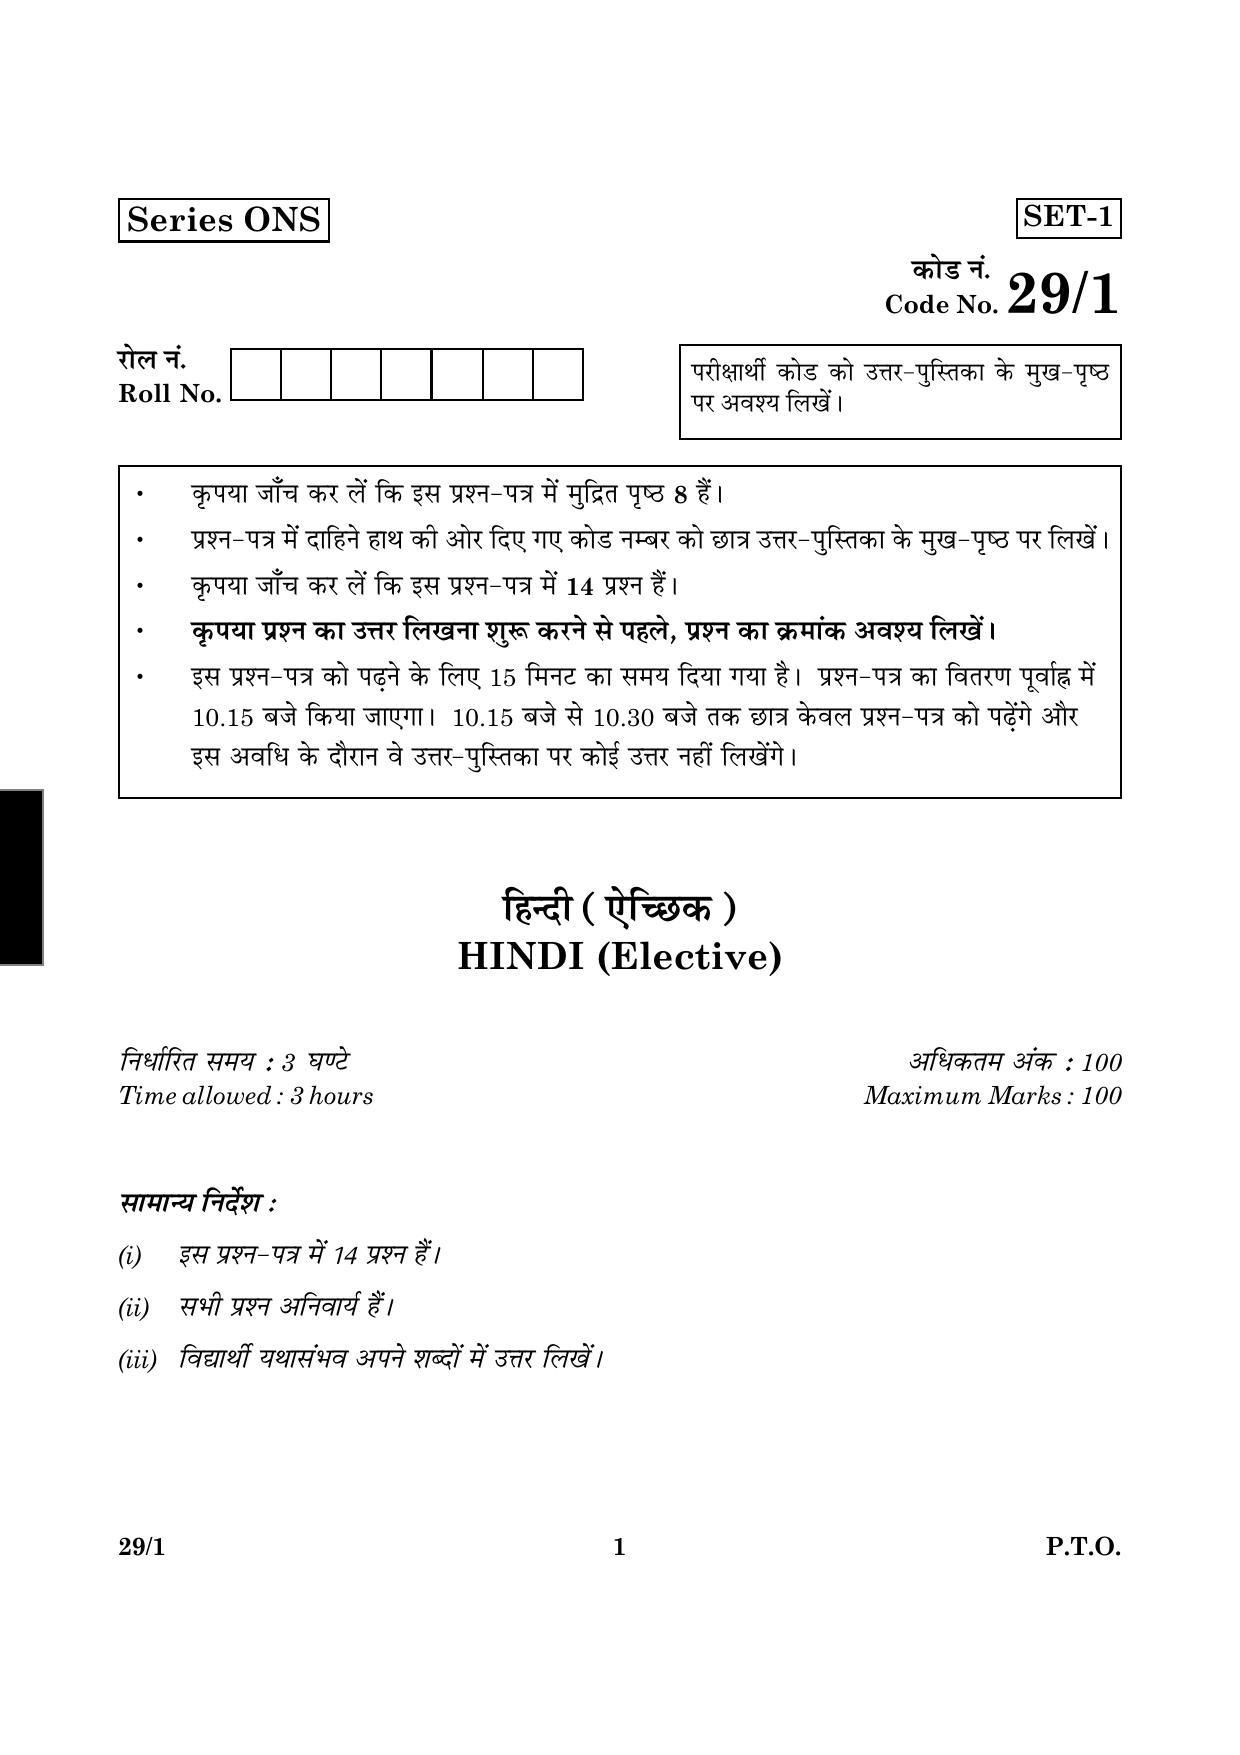 CBSE Class 12 029 Set 1 Hindi Elective 2016 Question Paper - Page 1